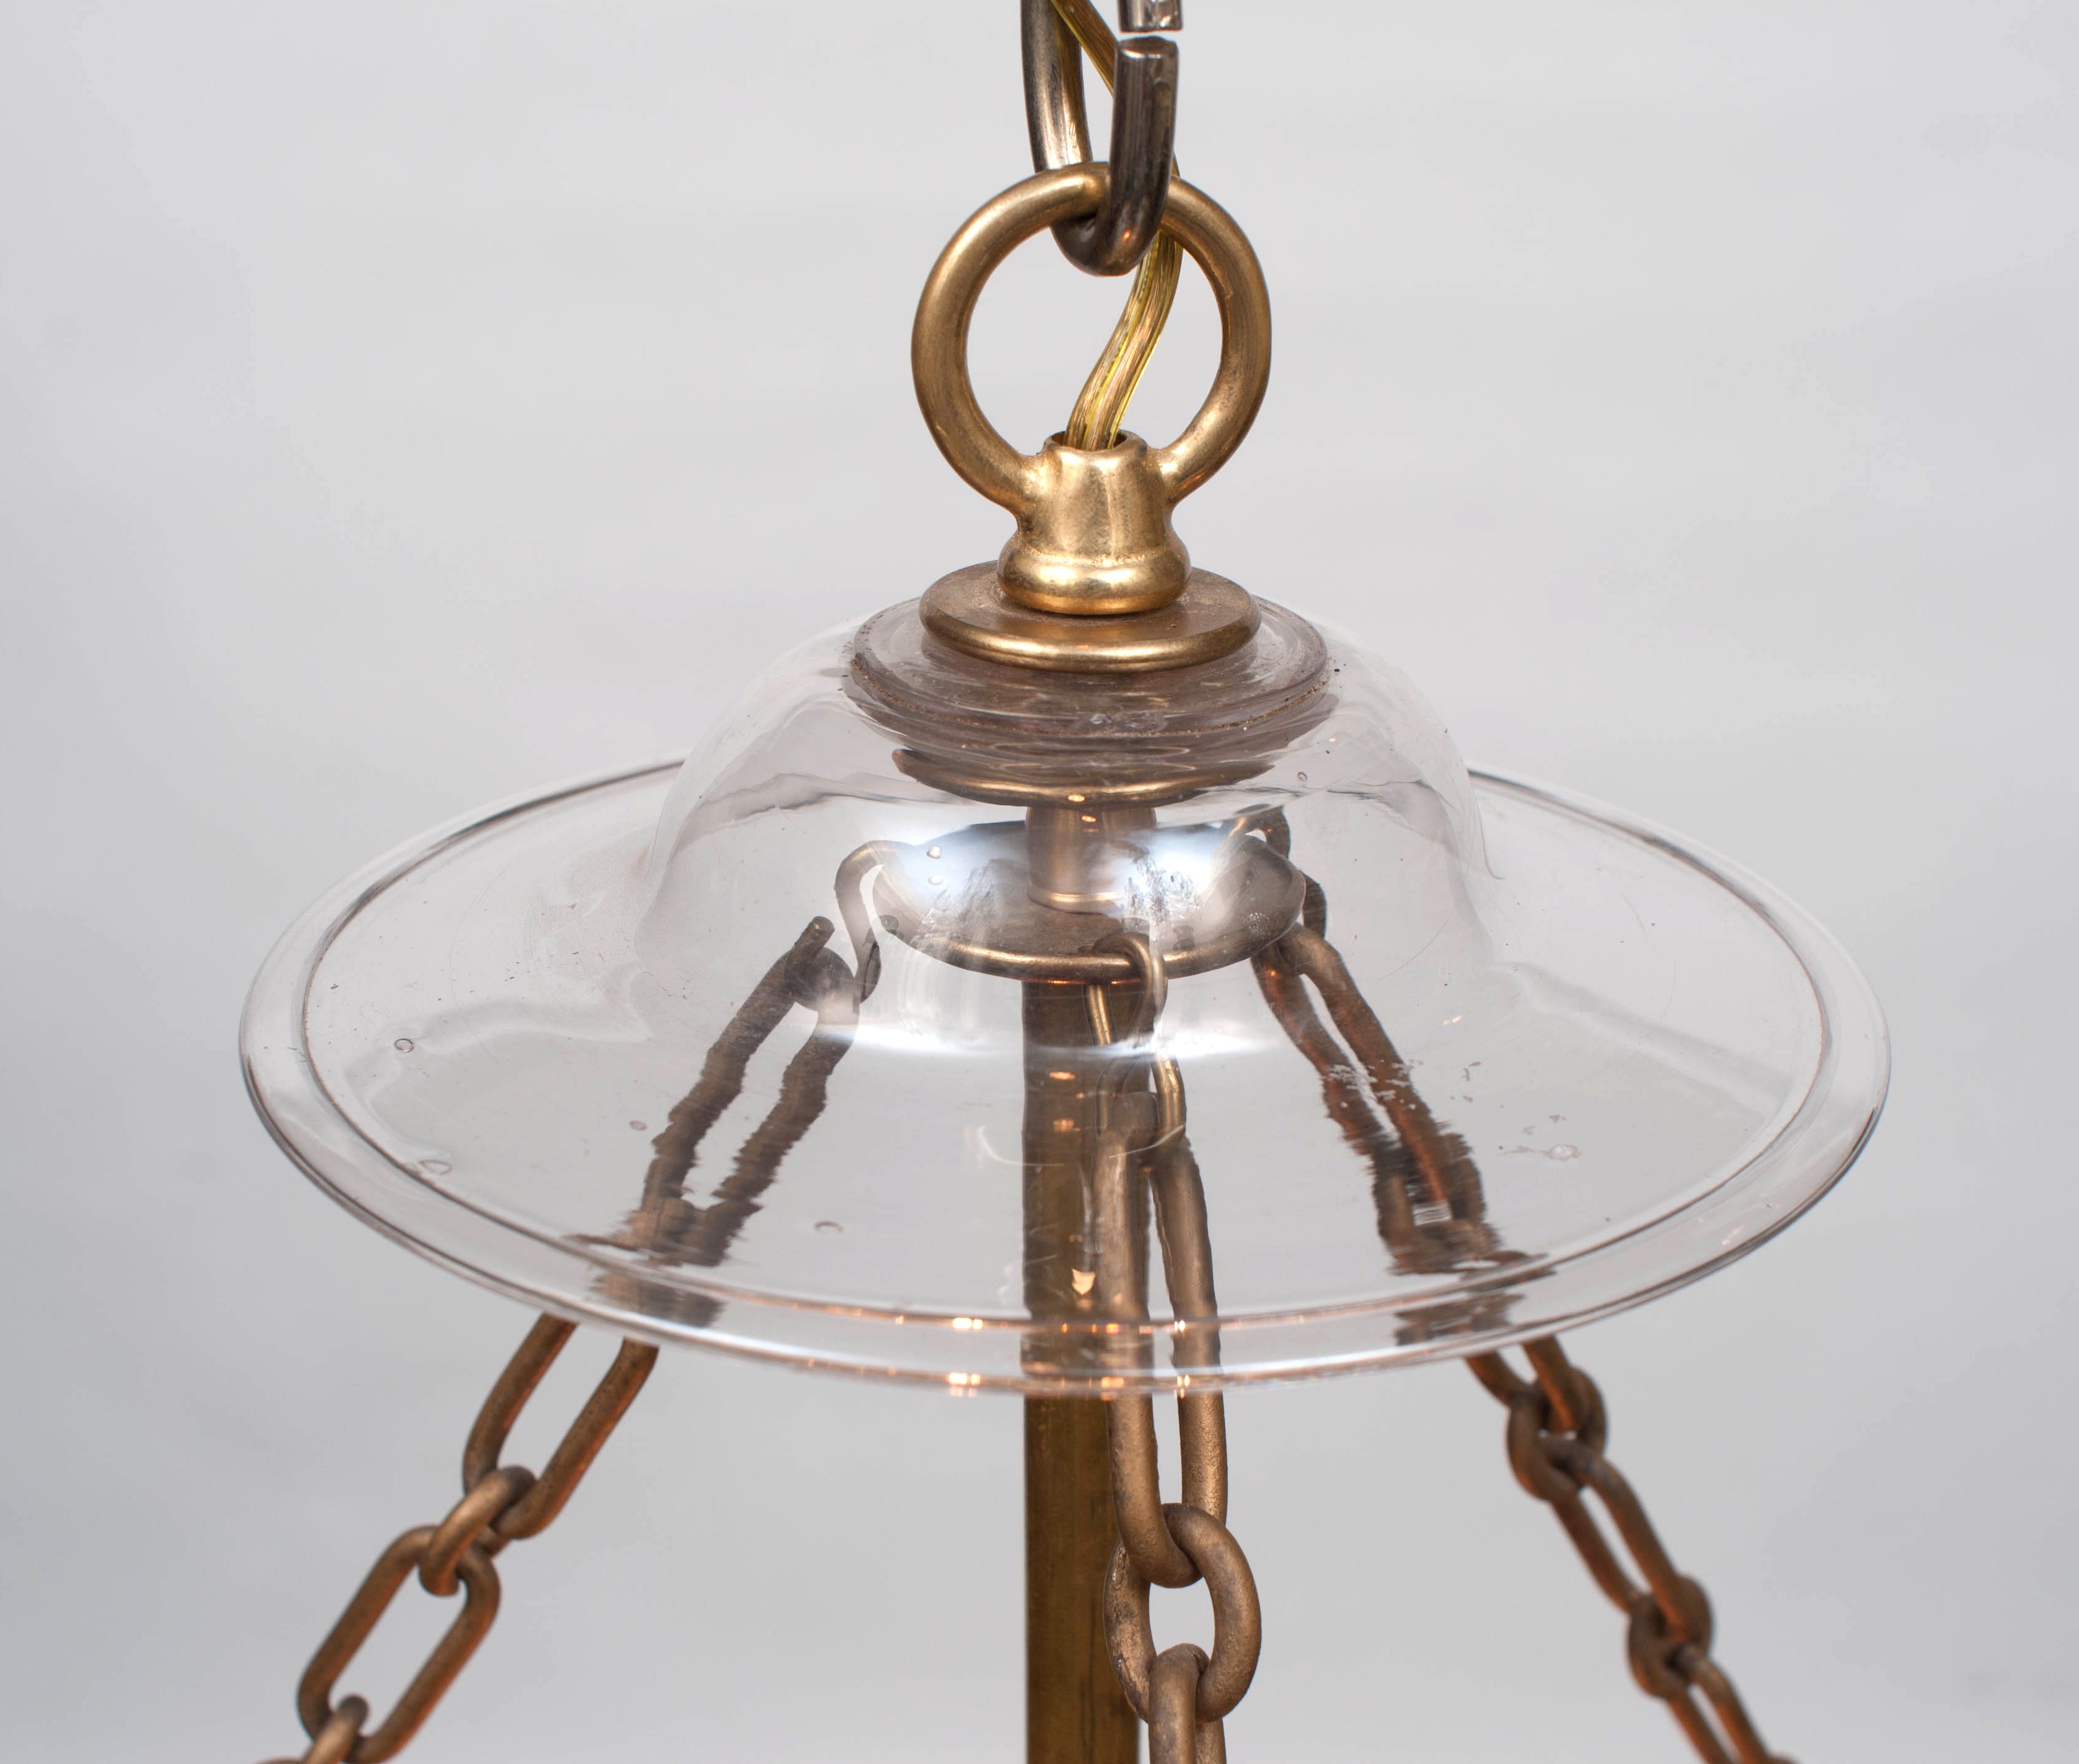 Frosted handblown glass cut to clear - gilt brass (ormolu) fittings - three lights -hanging hardware and appropriate chain and ceiling cap included.